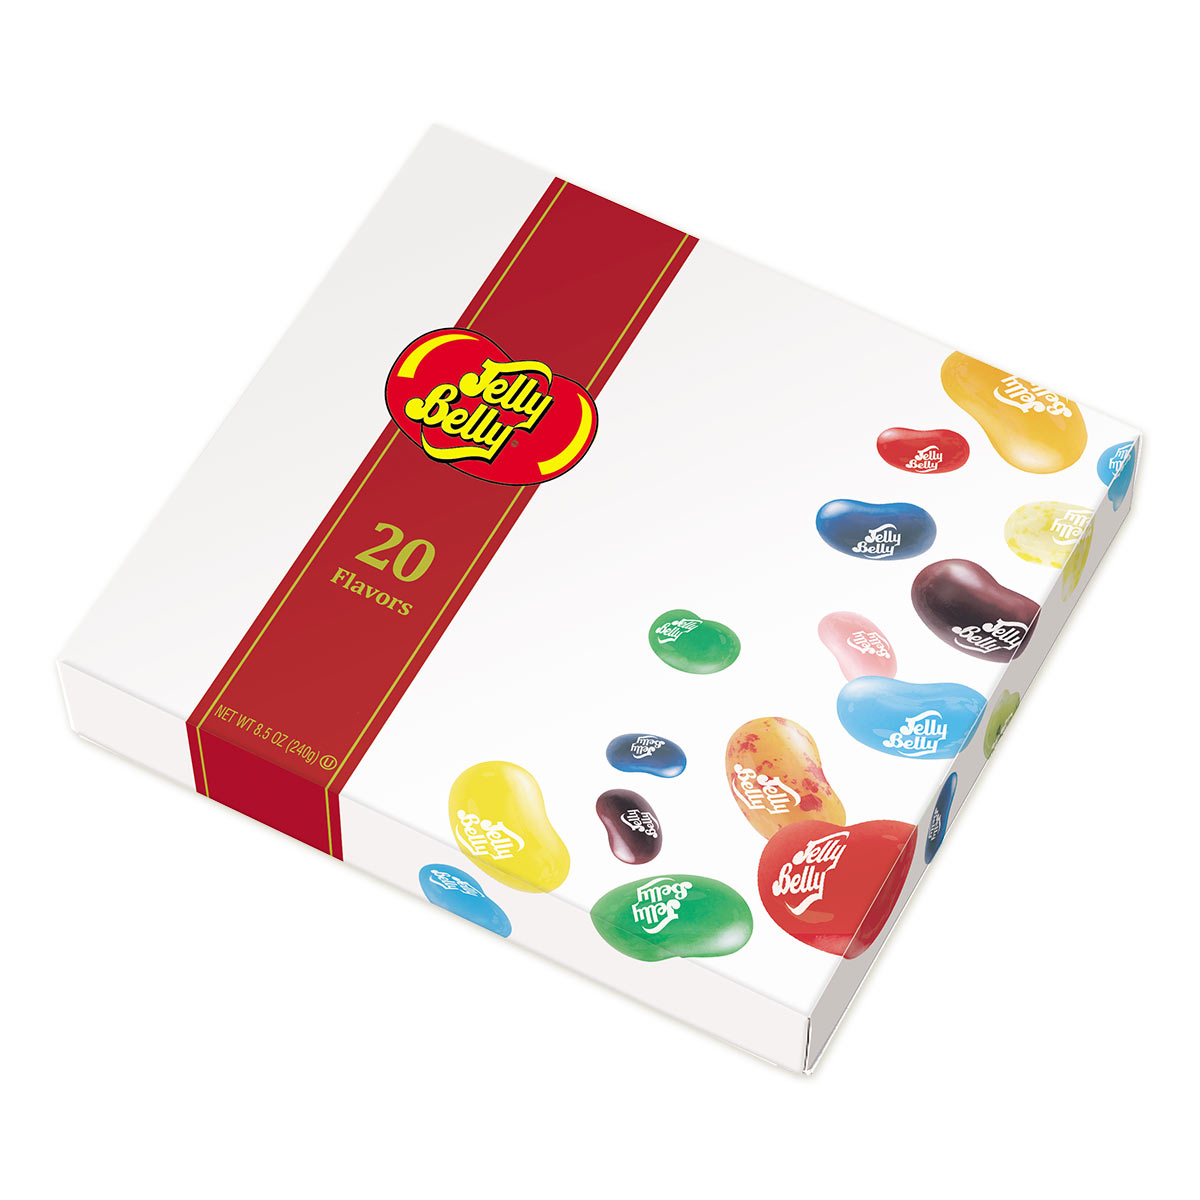 Jelly Belly 20-Flavor Gift Box. Assorted flavors like Buttered Popcorn; Very Cherry and more. Great present for candy fans.